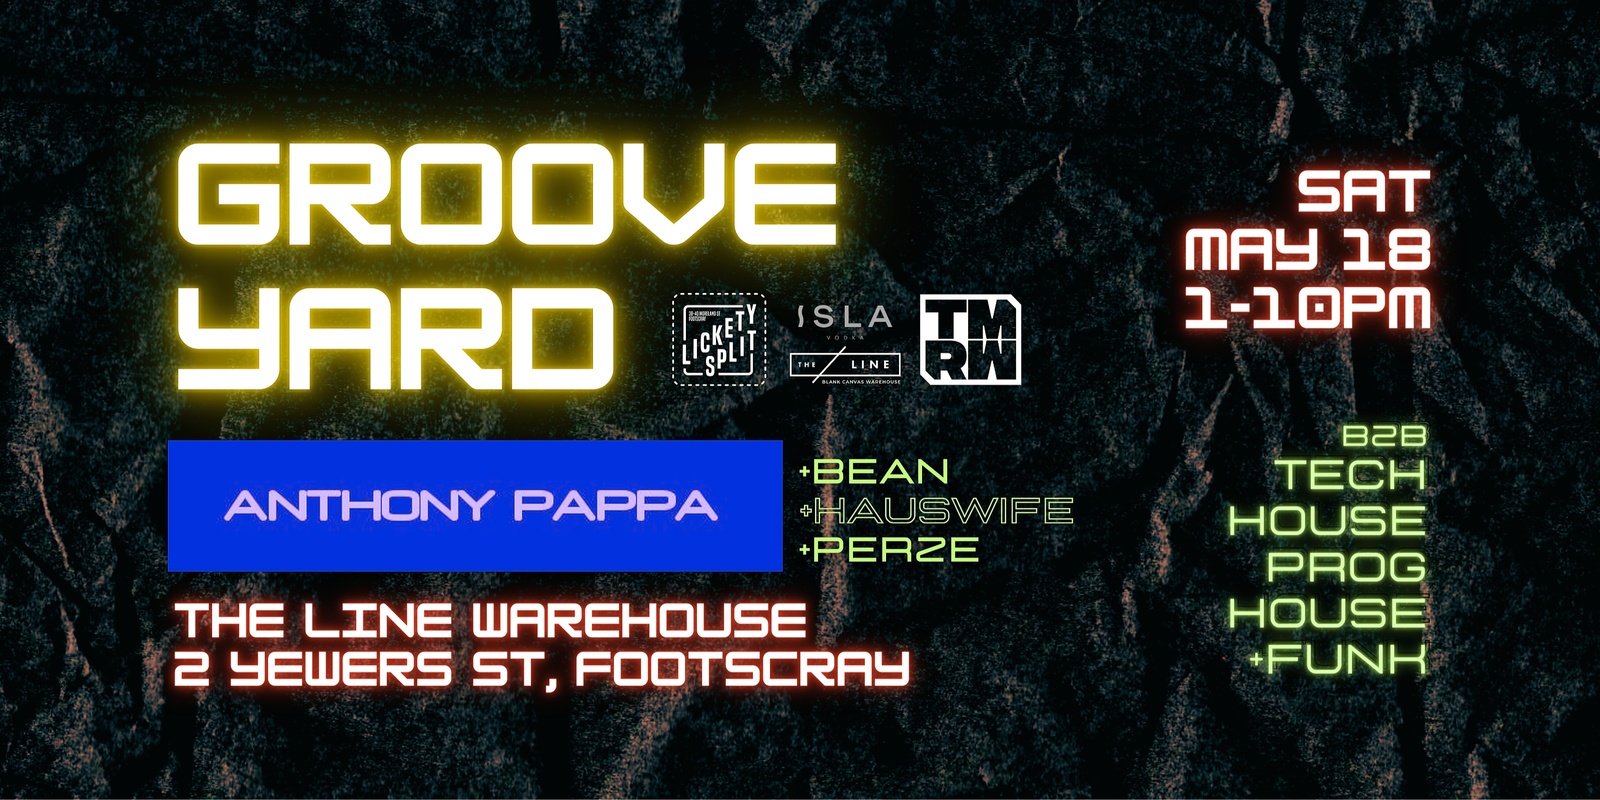 Banner image for GROOVEYARD Ft. ANTHONY PAPPA